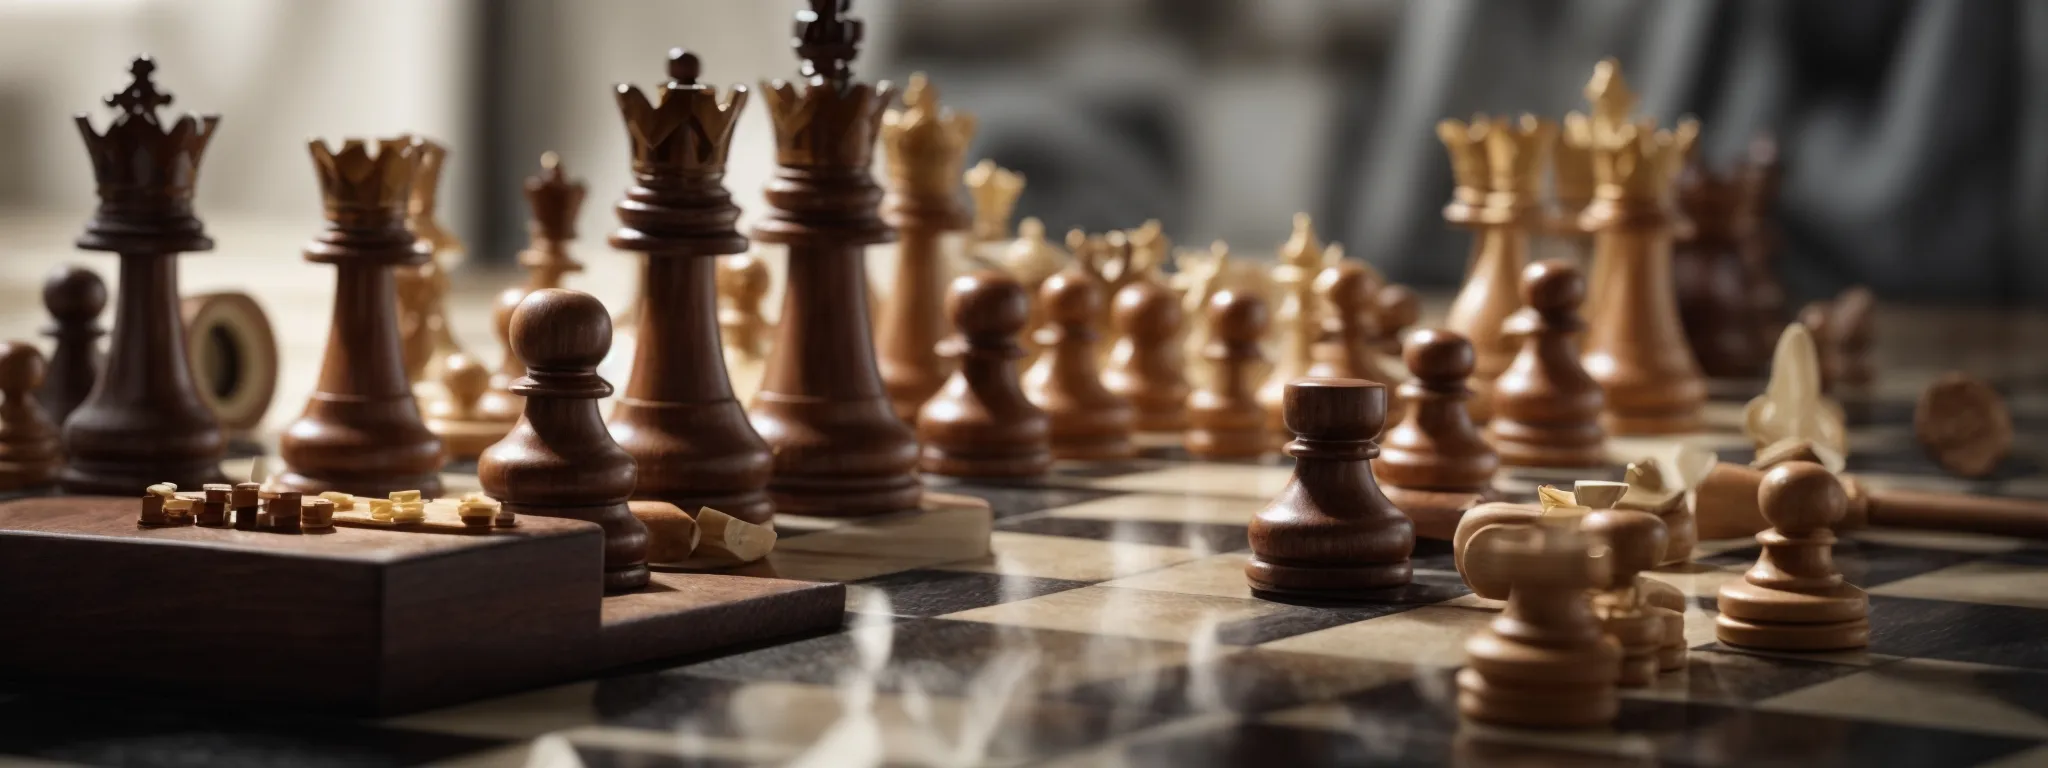 a chessboard with some pieces positioned as if in mid-game, symbolizing strategy and competition in marketing approaches.